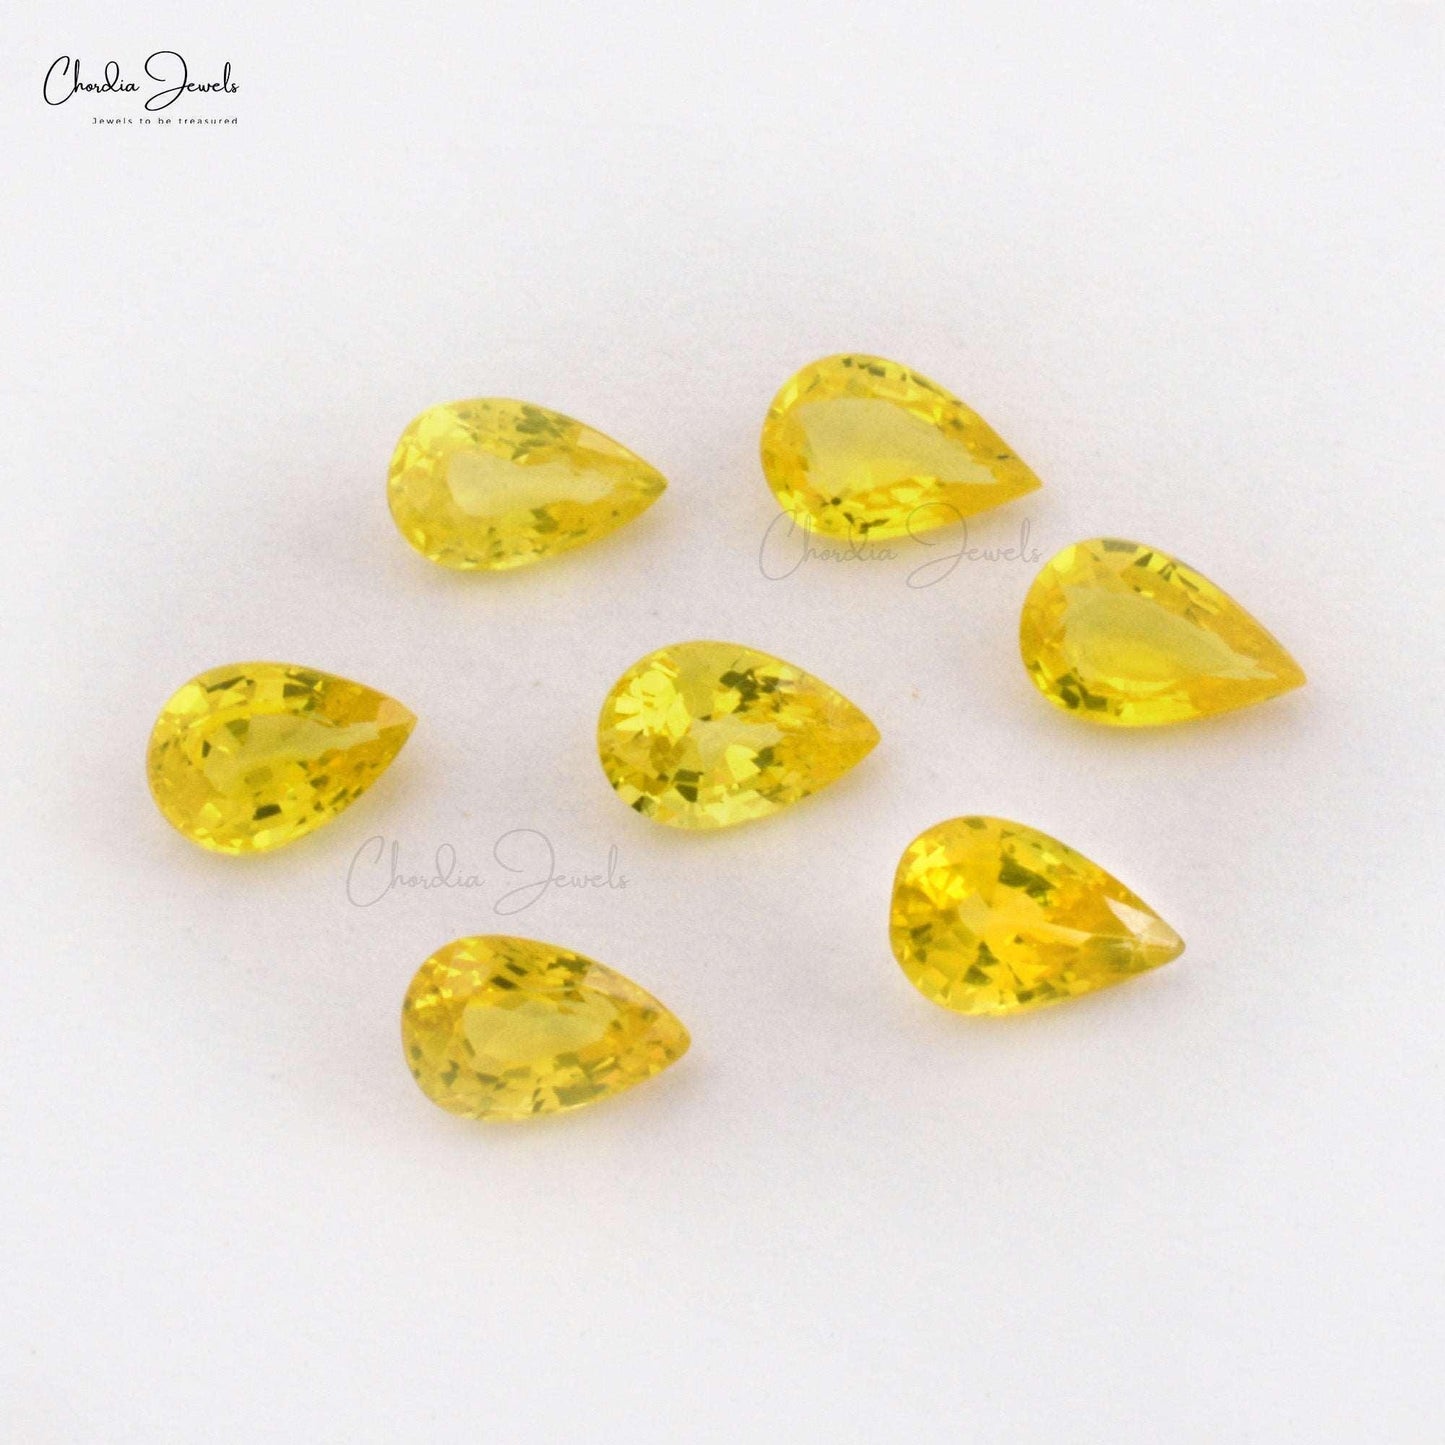 Top Quality Yellow Sapphire 6x4 mm Pear-Cut Loose Gemstones. Weight: 0.58 Carats, Stone Cut: Excellent, Precious Gemstones from Chordia Jewels.